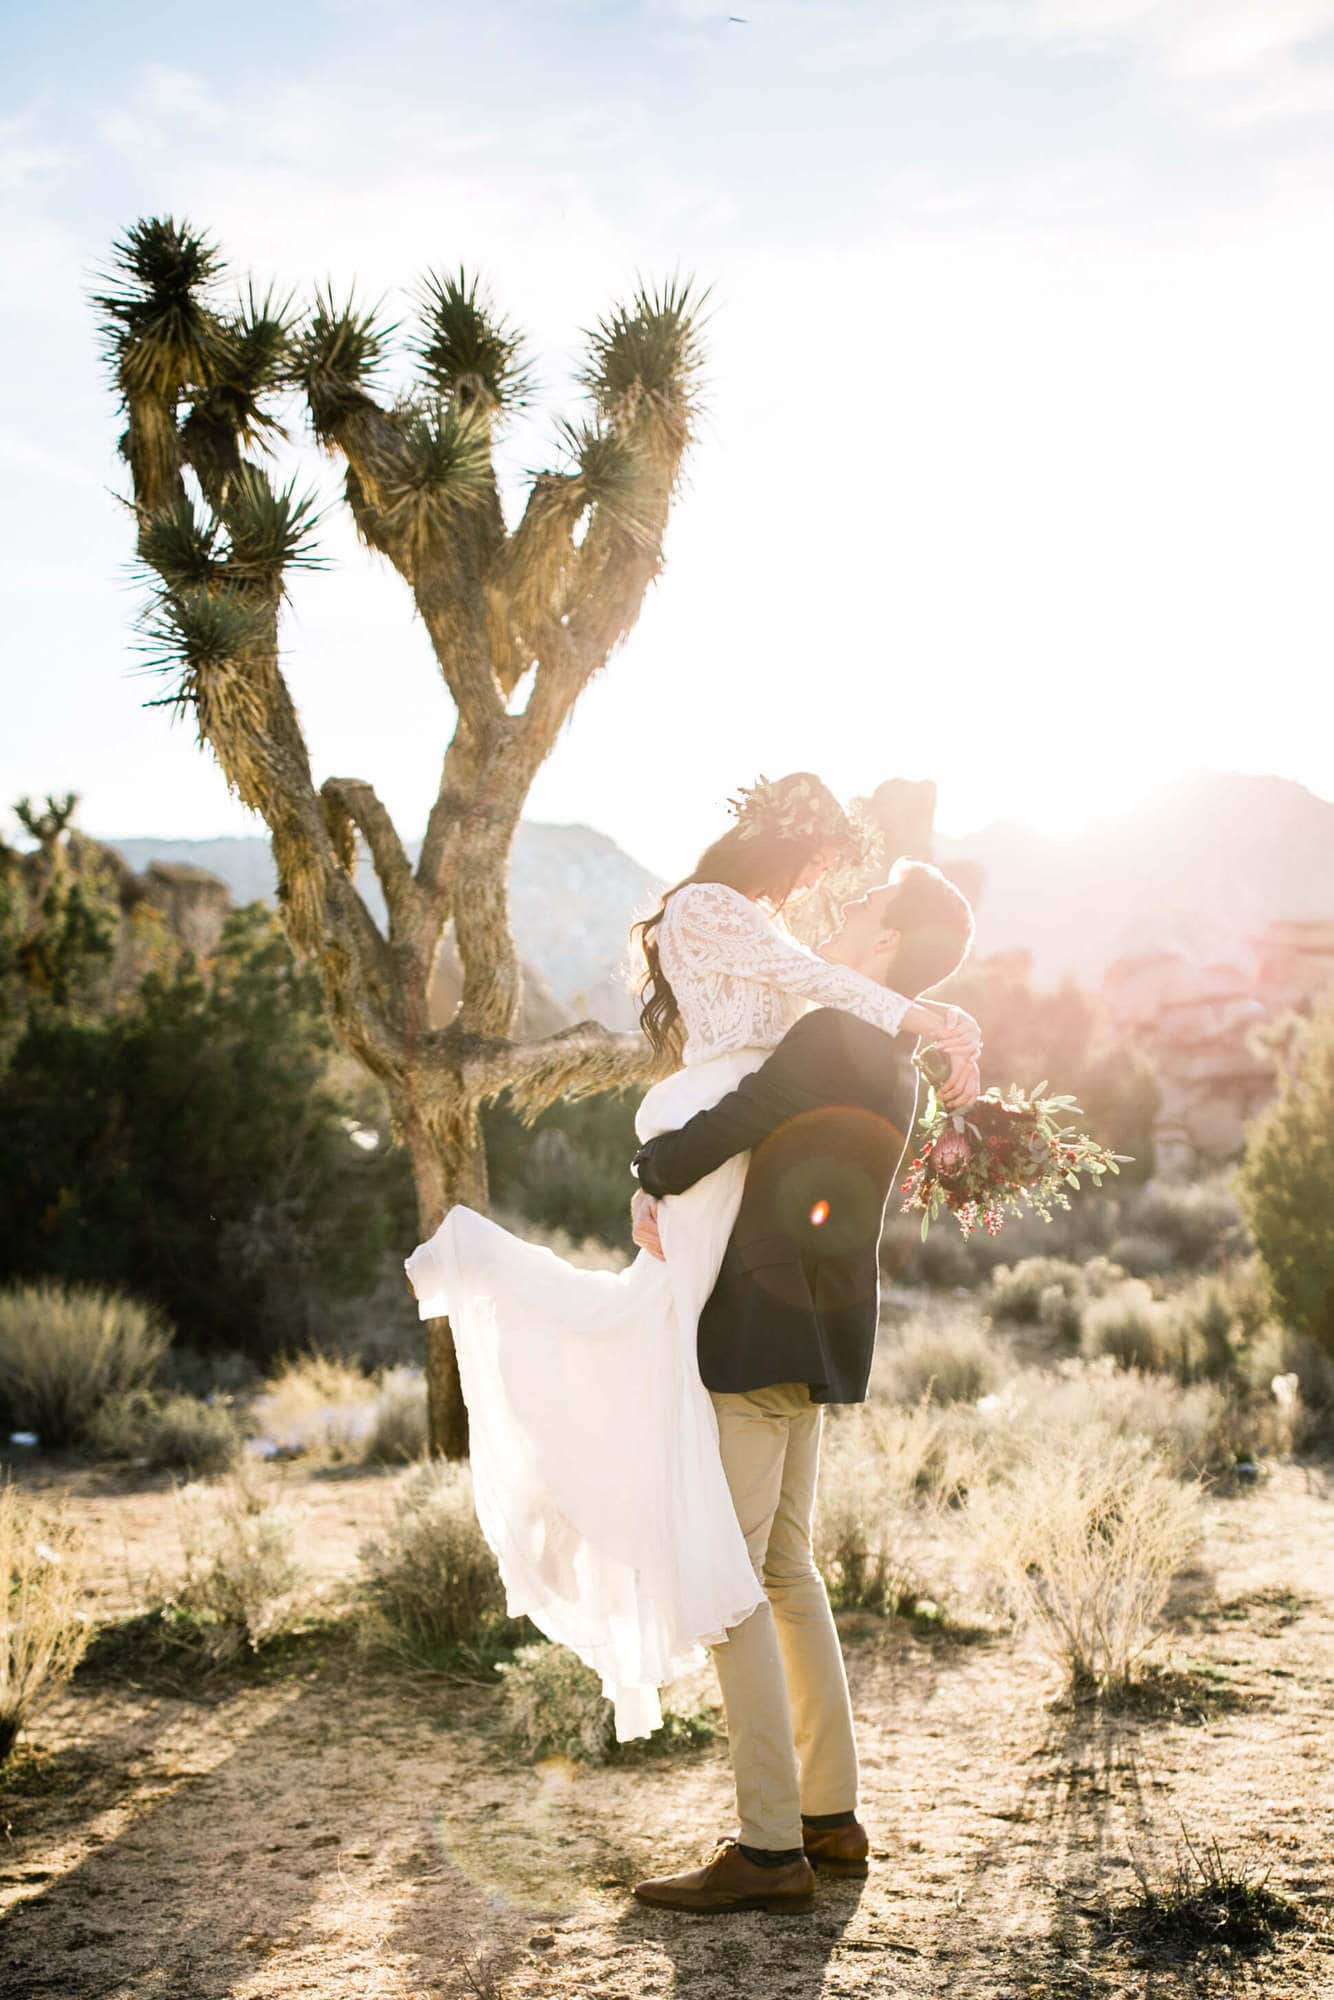 This romantic Joshua Tree wedding was a real Peak Existence experience. The day was full of laughter, tears, & the prettiest light the desert can offer.